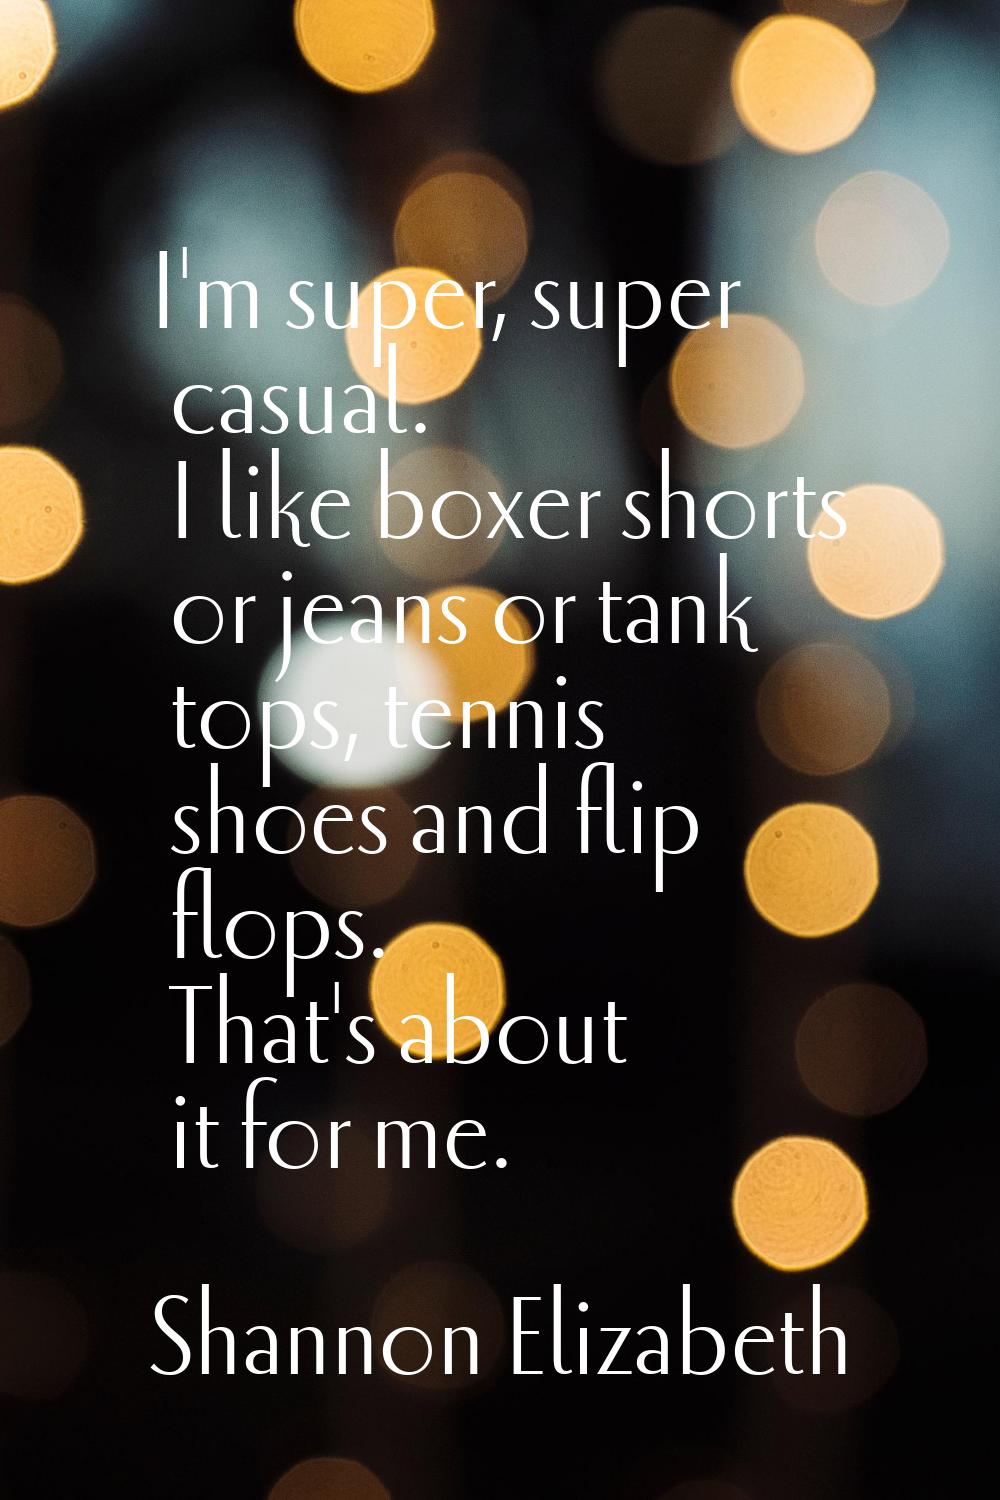 I'm super, super casual. I like boxer shorts or jeans or tank tops, tennis shoes and flip flops. Th